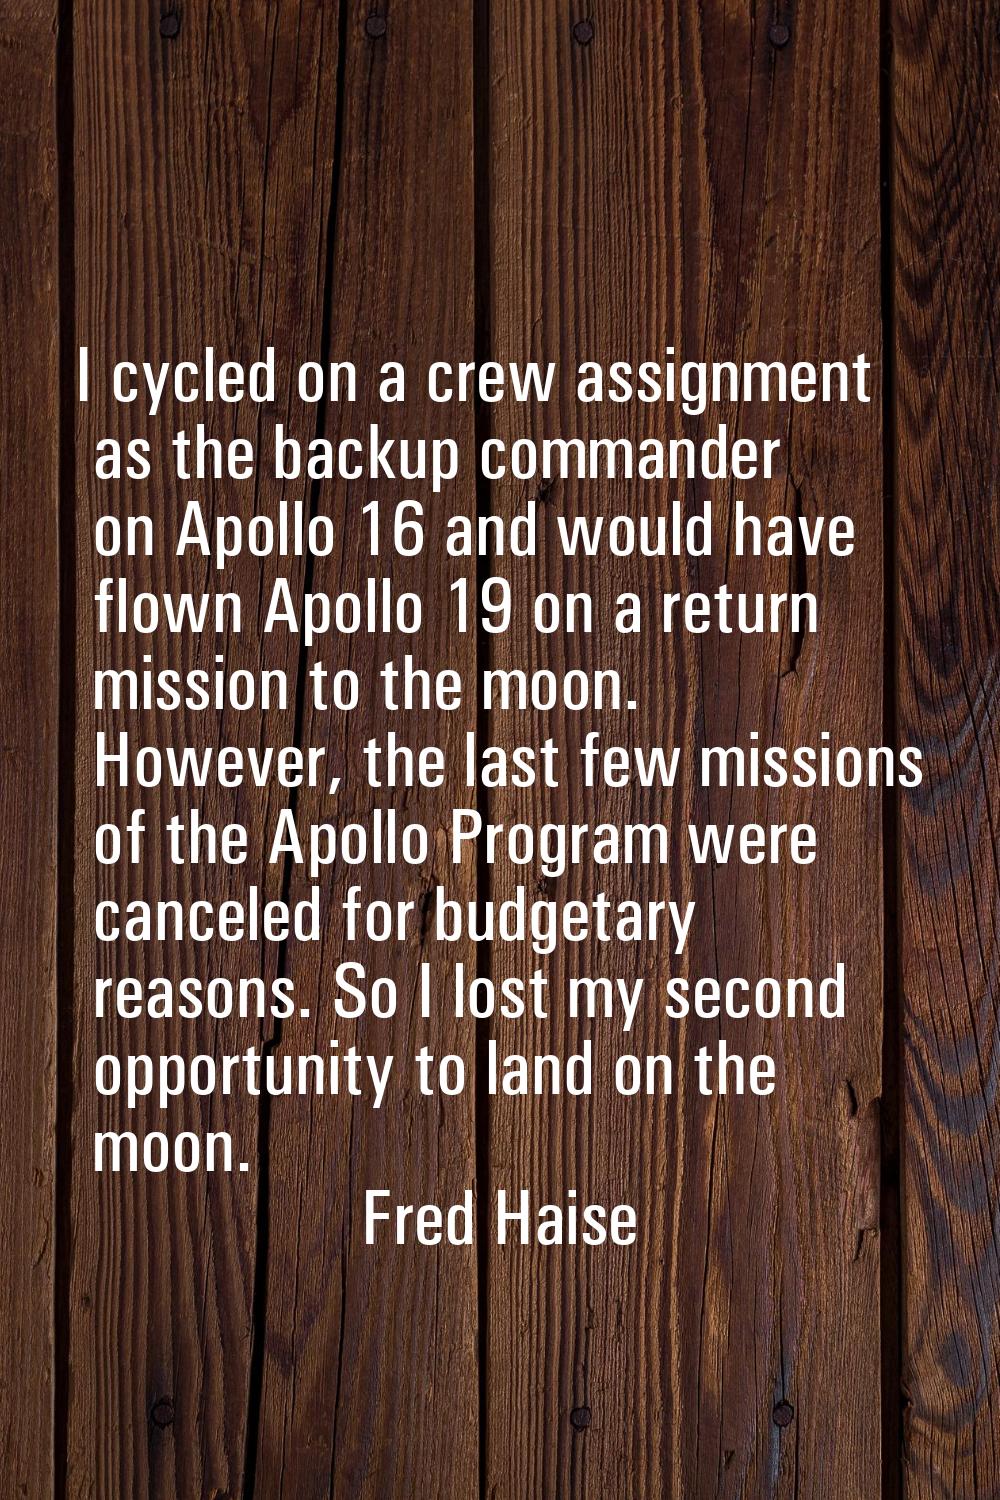 I cycled on a crew assignment as the backup commander on Apollo 16 and would have flown Apollo 19 o